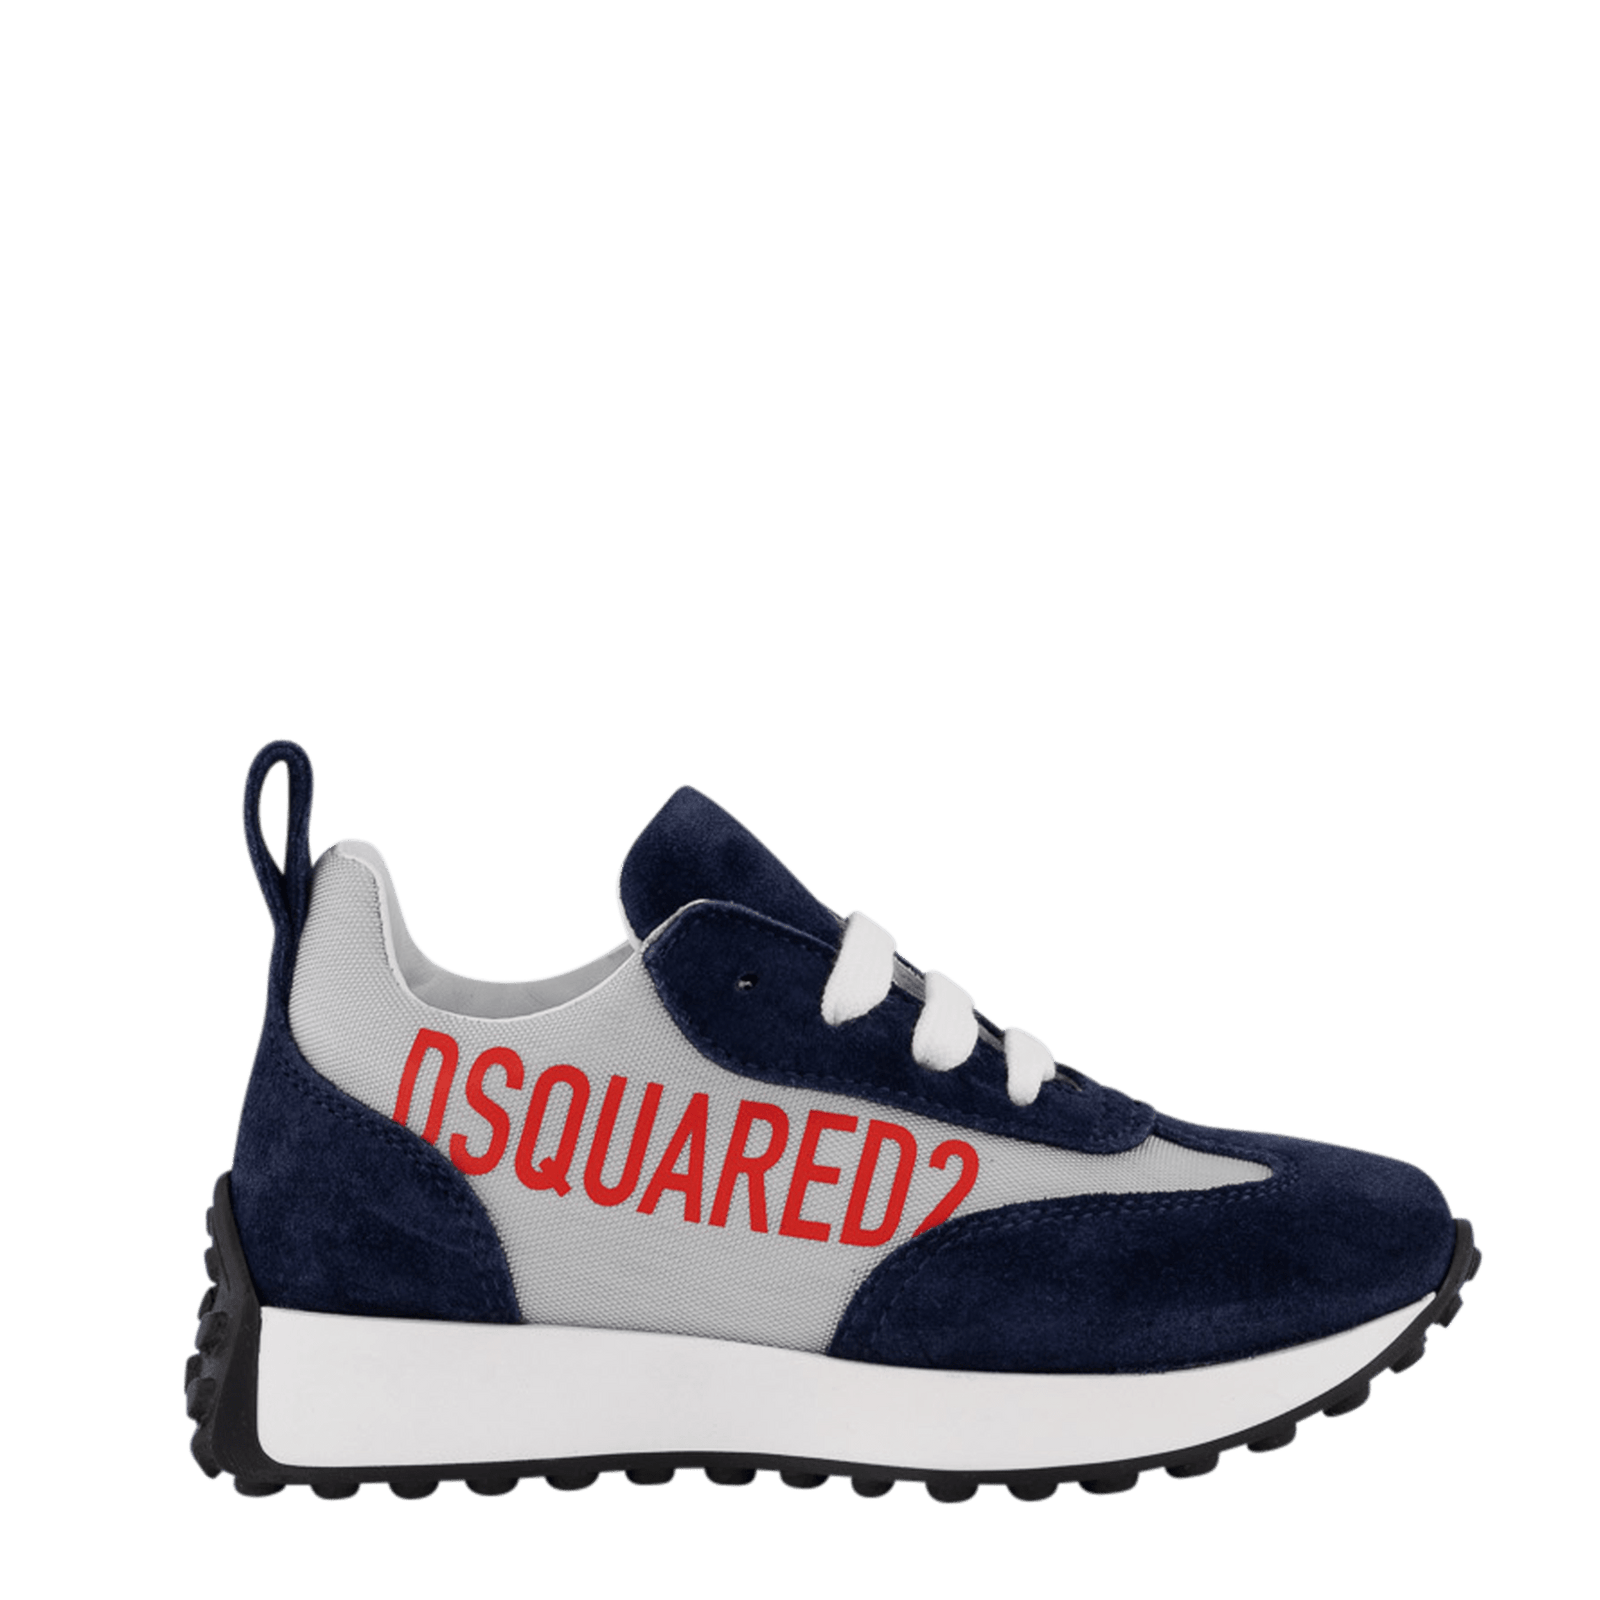 Dsquared2 Kinder Unisex Sneakers Navy 27